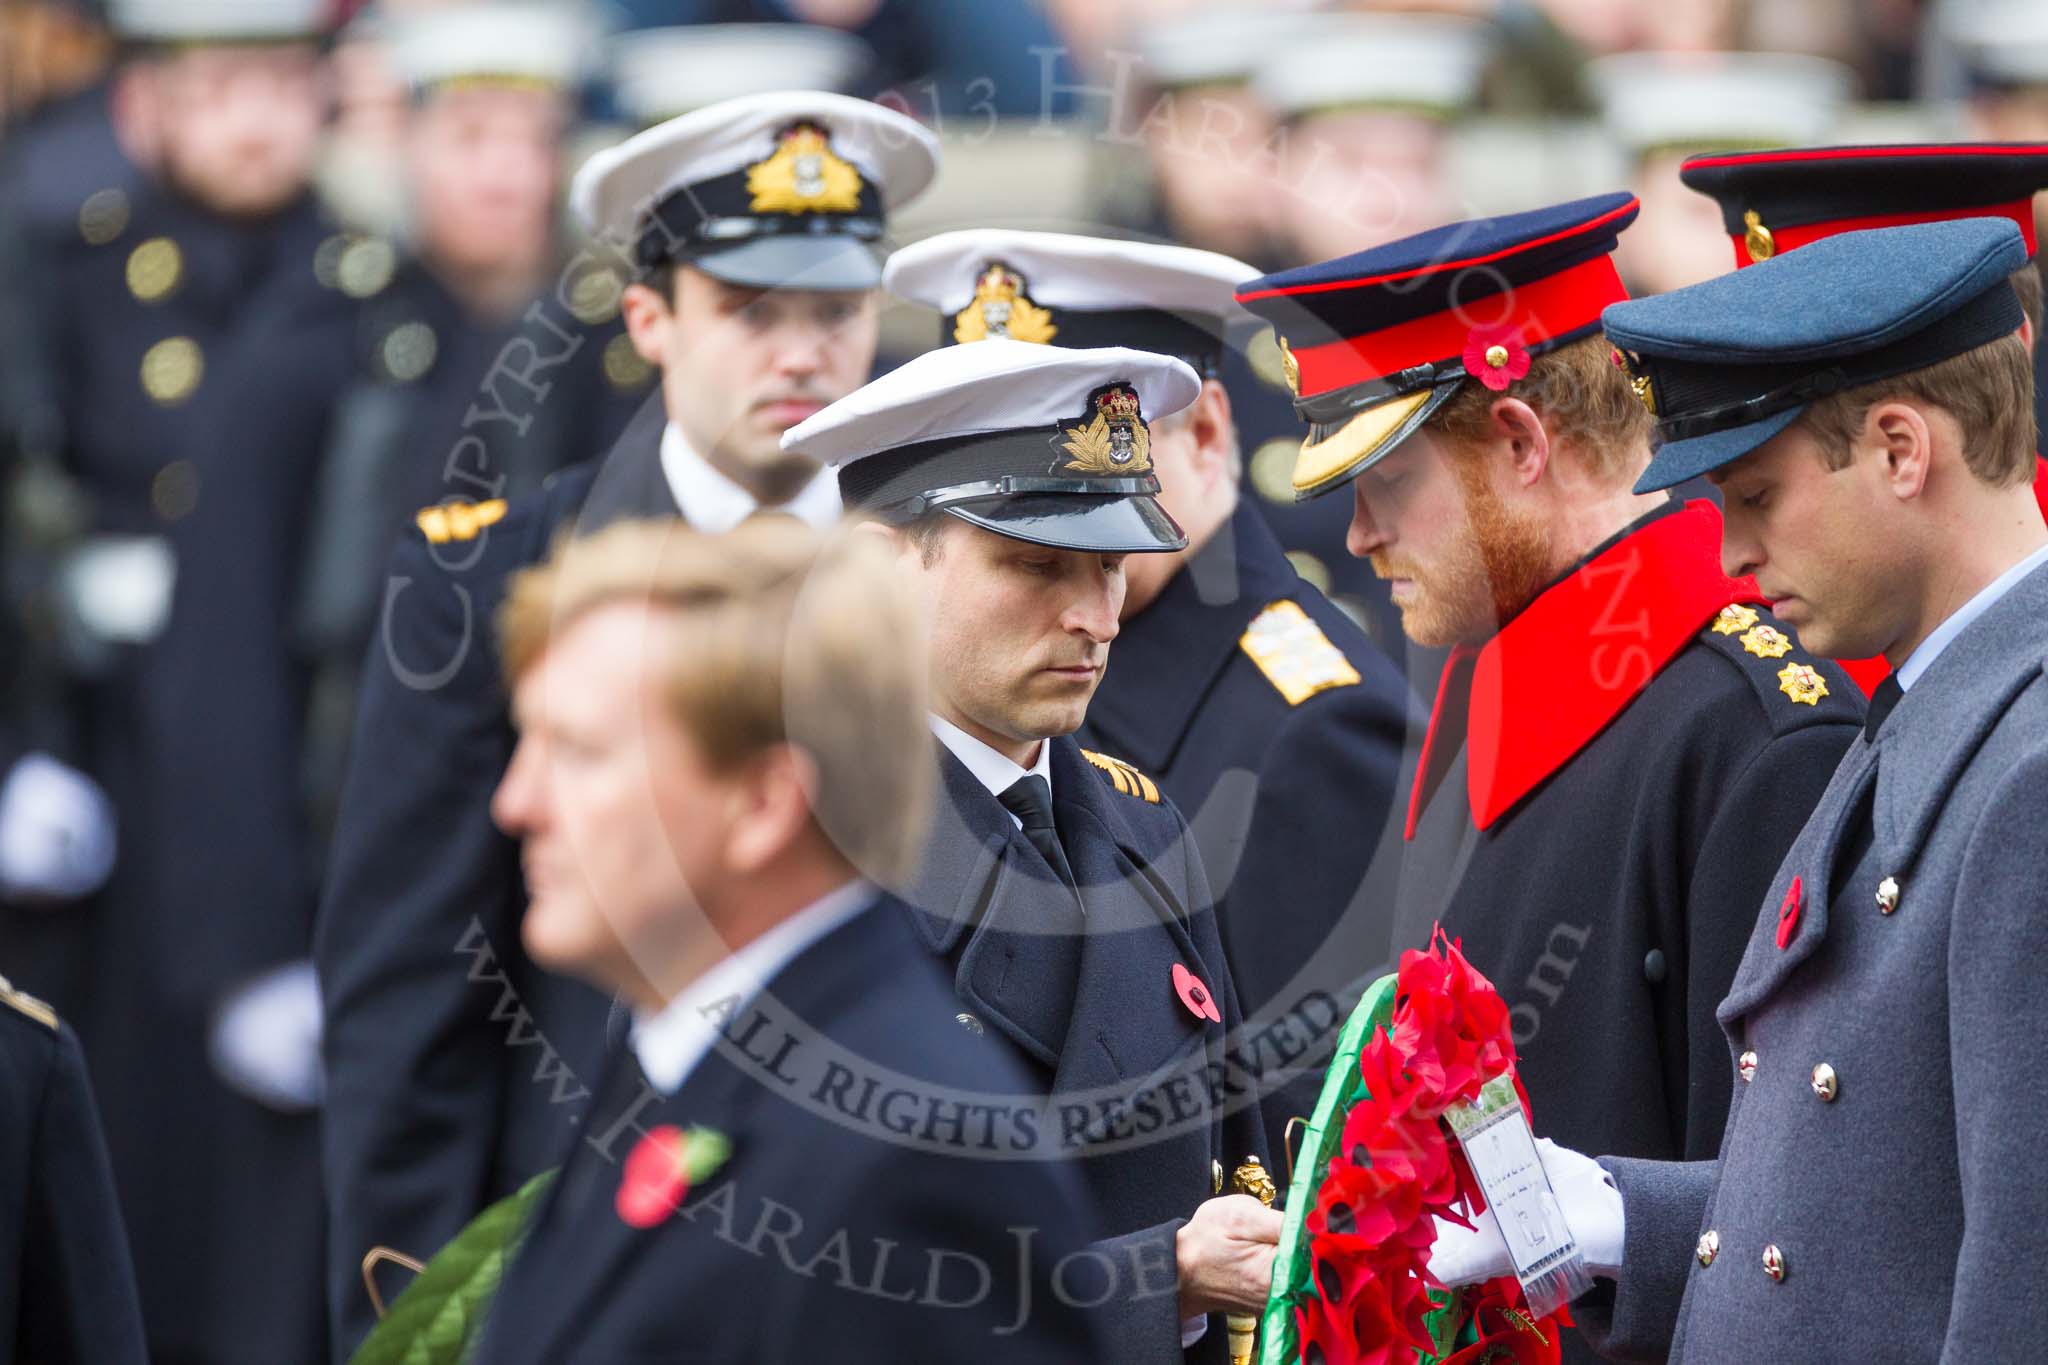 Remembrance Sunday at the Cenotaph 2015: The Equerry to HRH The Duke of Cambridge,  Lieutenant  Commander  James  Benbow, Royal Navy, handing over the wreath to Prince William. Behind them, Captain  Edward  Lane  Fox, Equerry to HRH Prince Henry of Wales, is handing over the wreath to Prince Harry. Image #190, 08 November 2015 11:05 Whitehall, London, UK